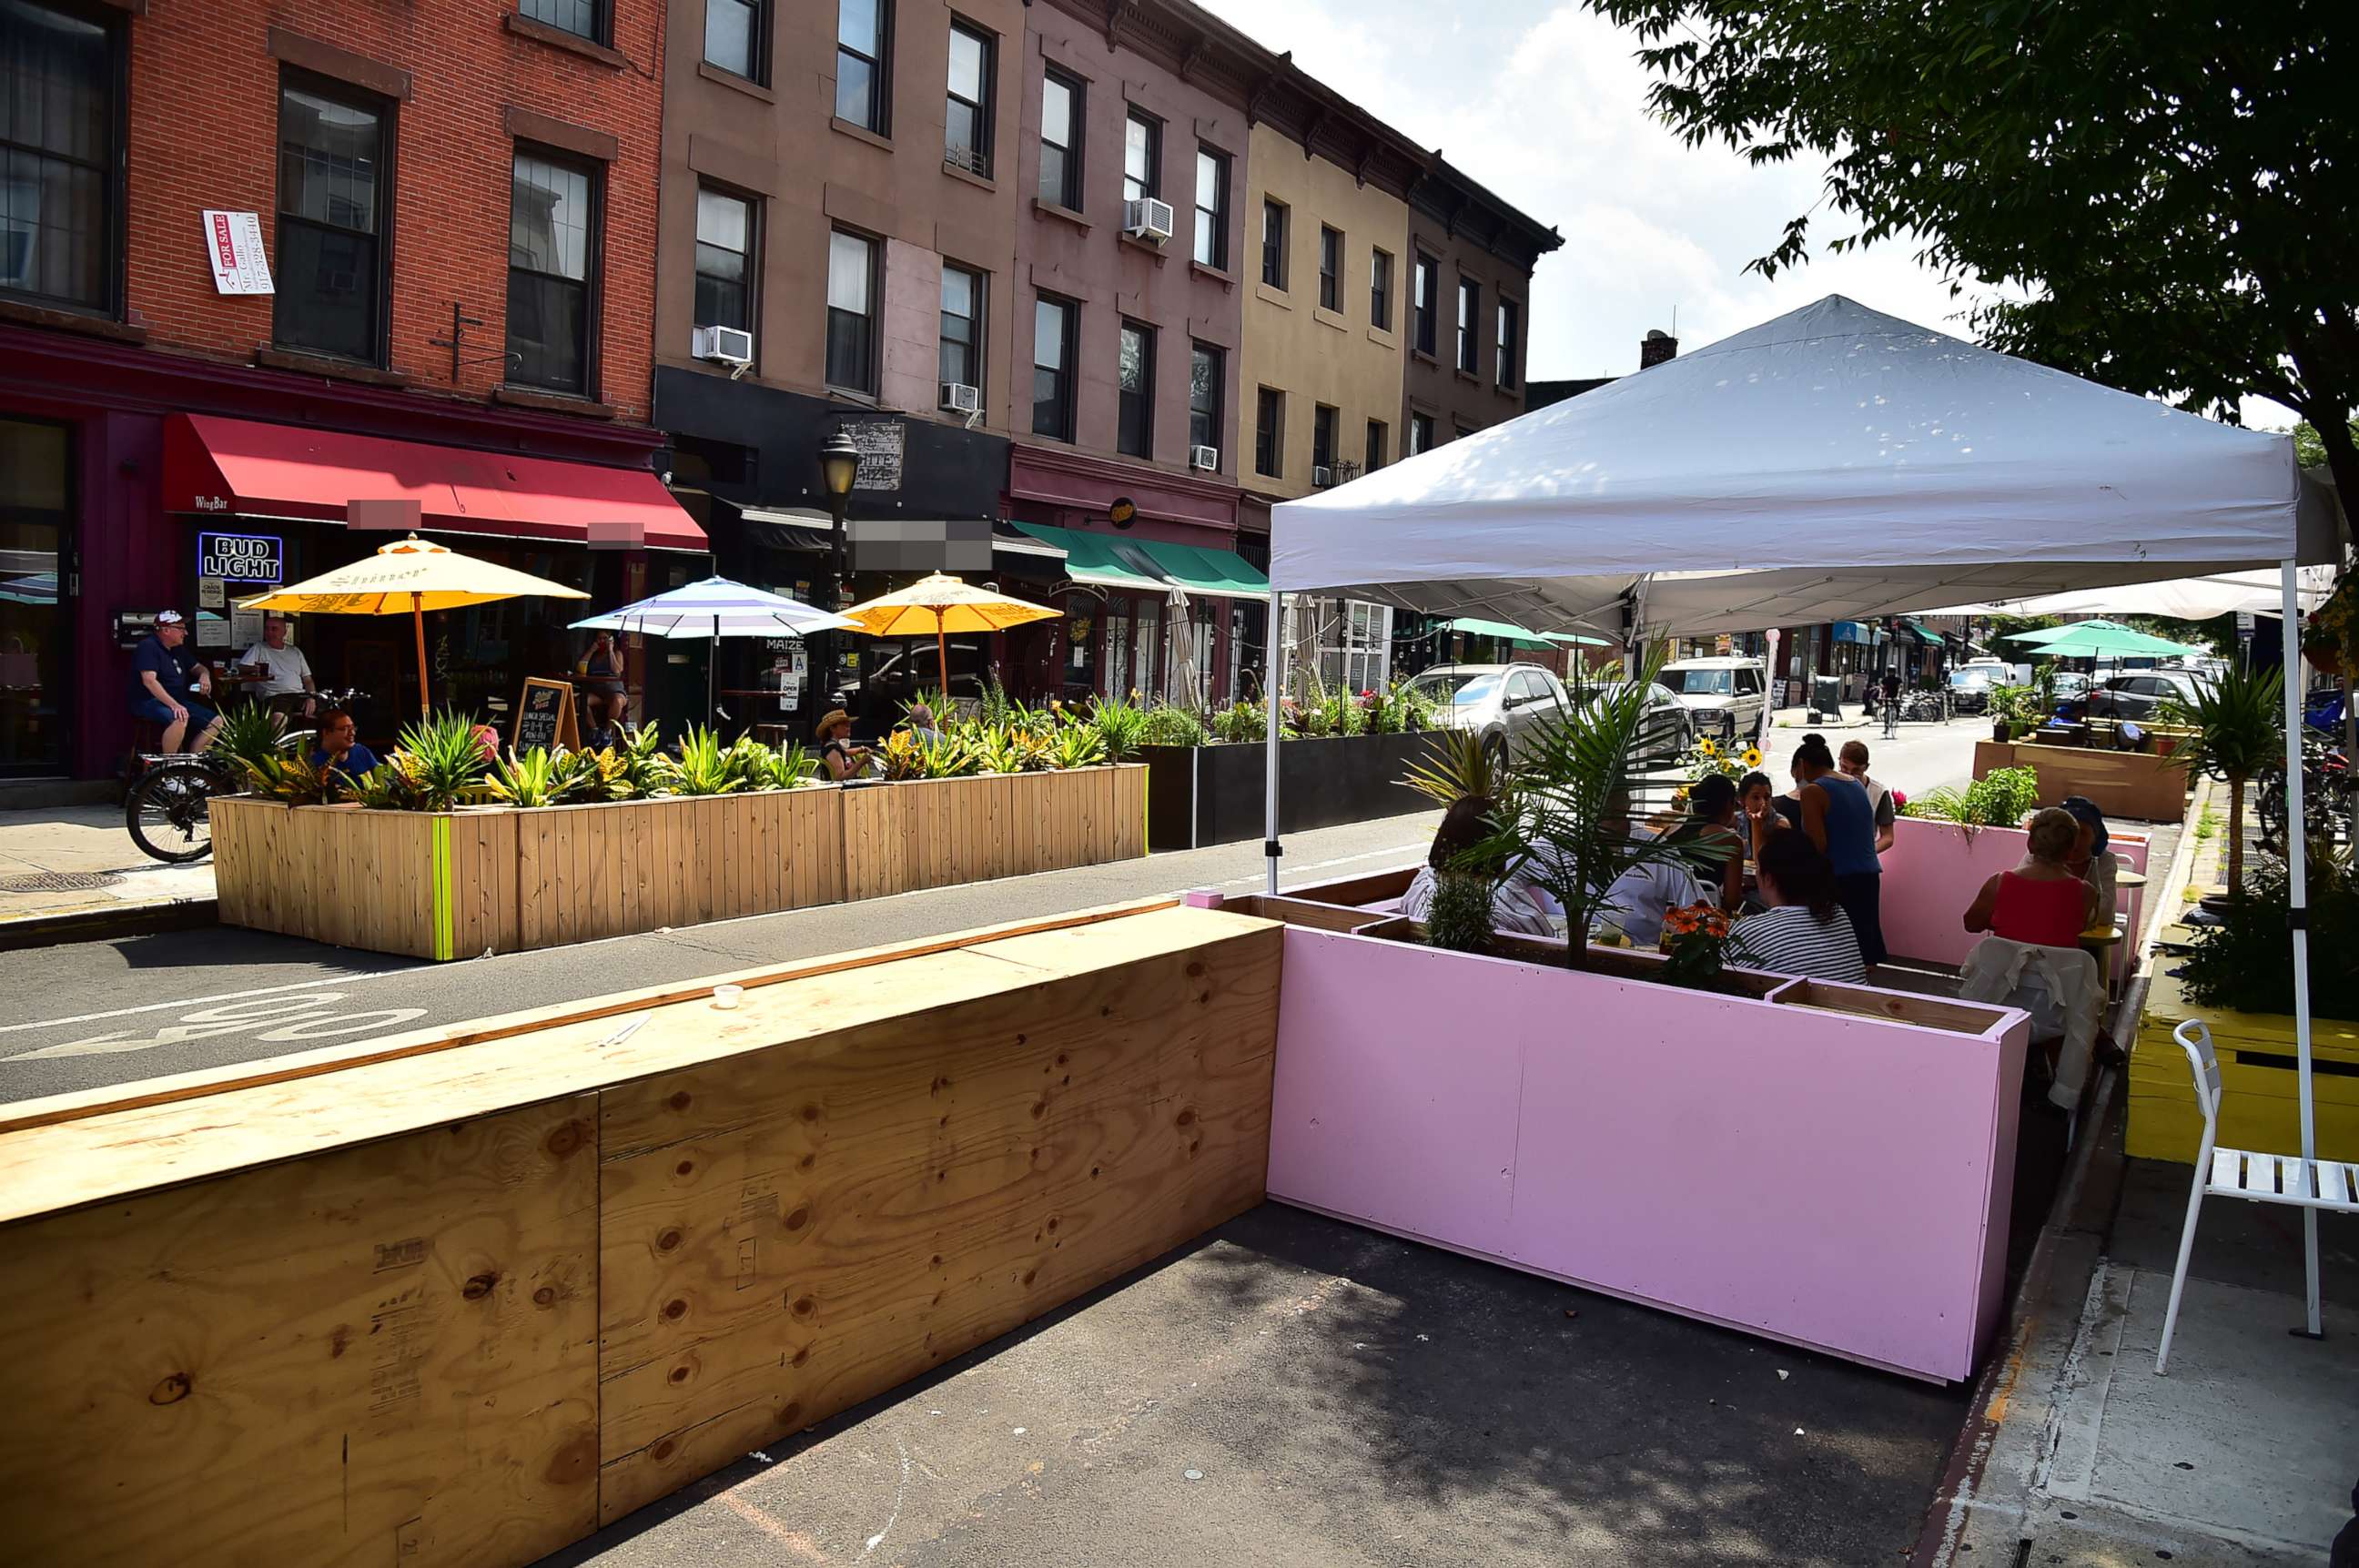 PHOTO: Outdoor restaurant and bar seating along Smith Street in the Carroll Gardens section of Brooklyn, NY.